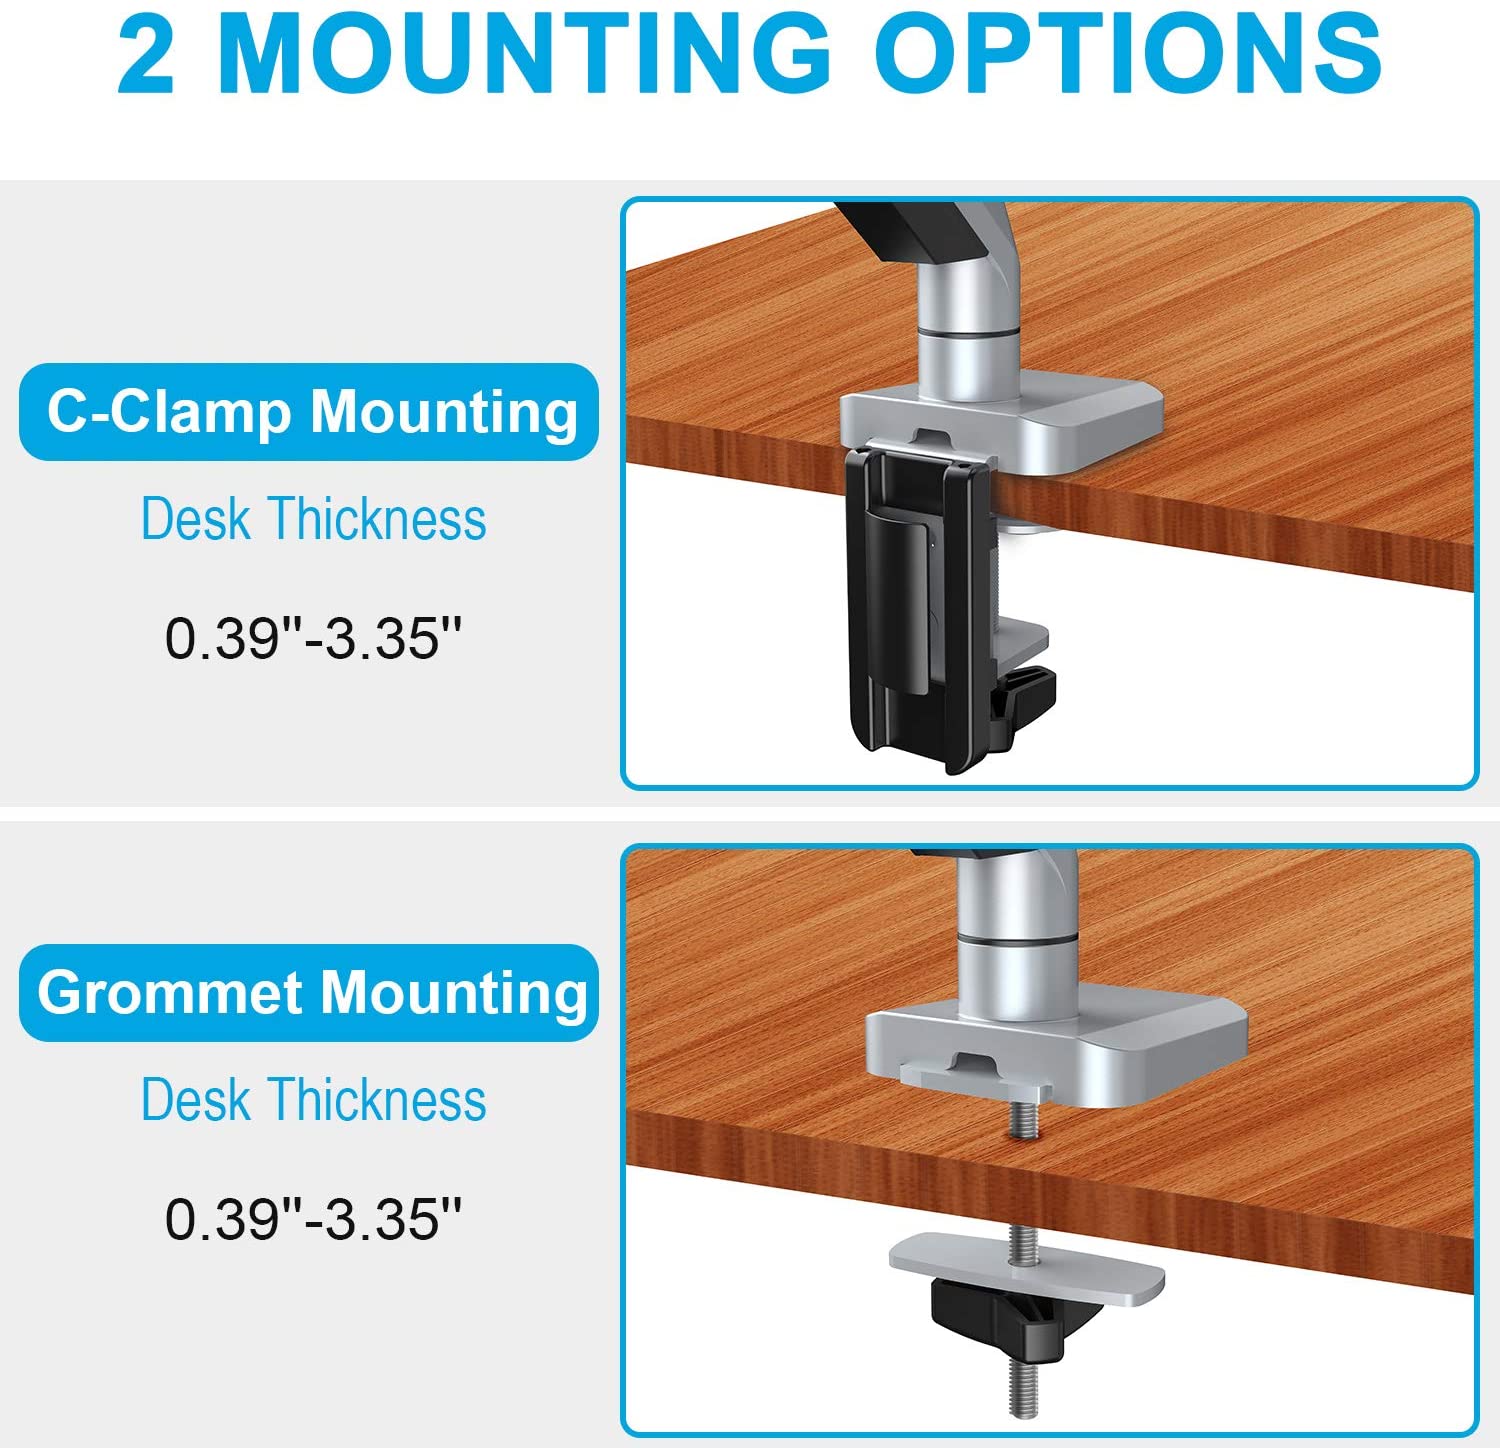 Single Arm monitor mount with 2 mounting options